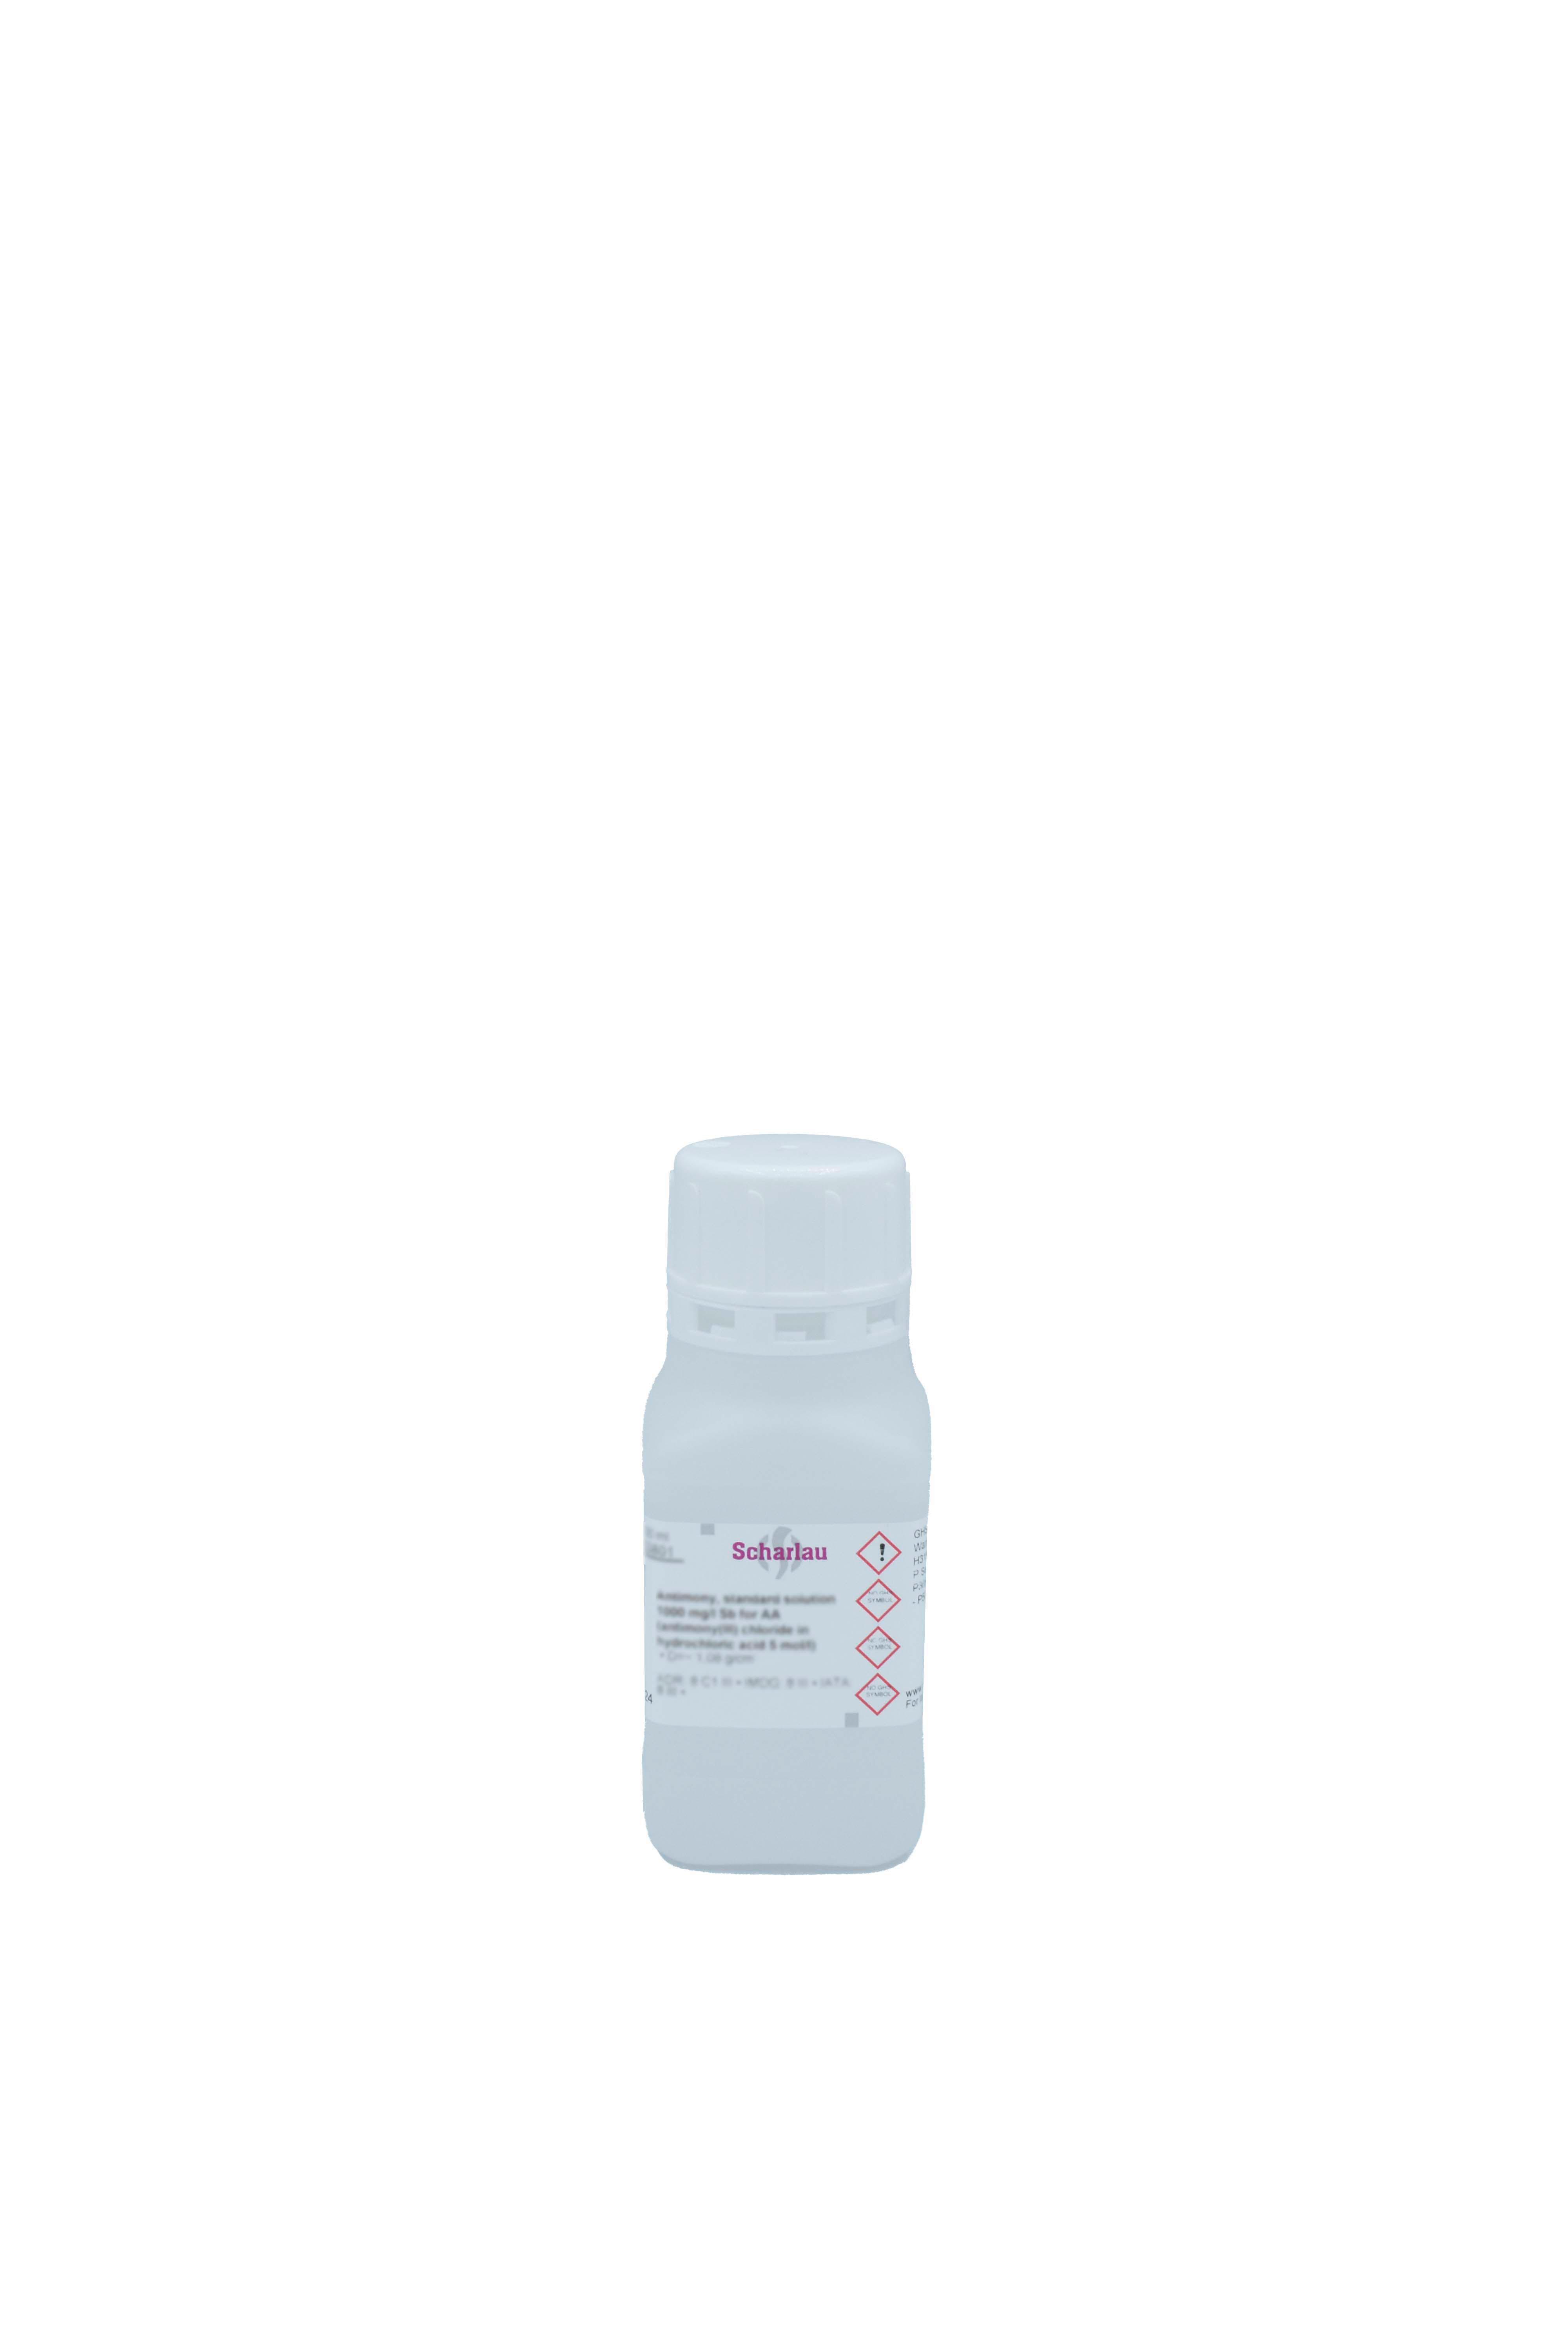 Potassium, standard solution 1000 mg/l K for AAsS (potassium nitrate in HNO3 0,5 mol/l)